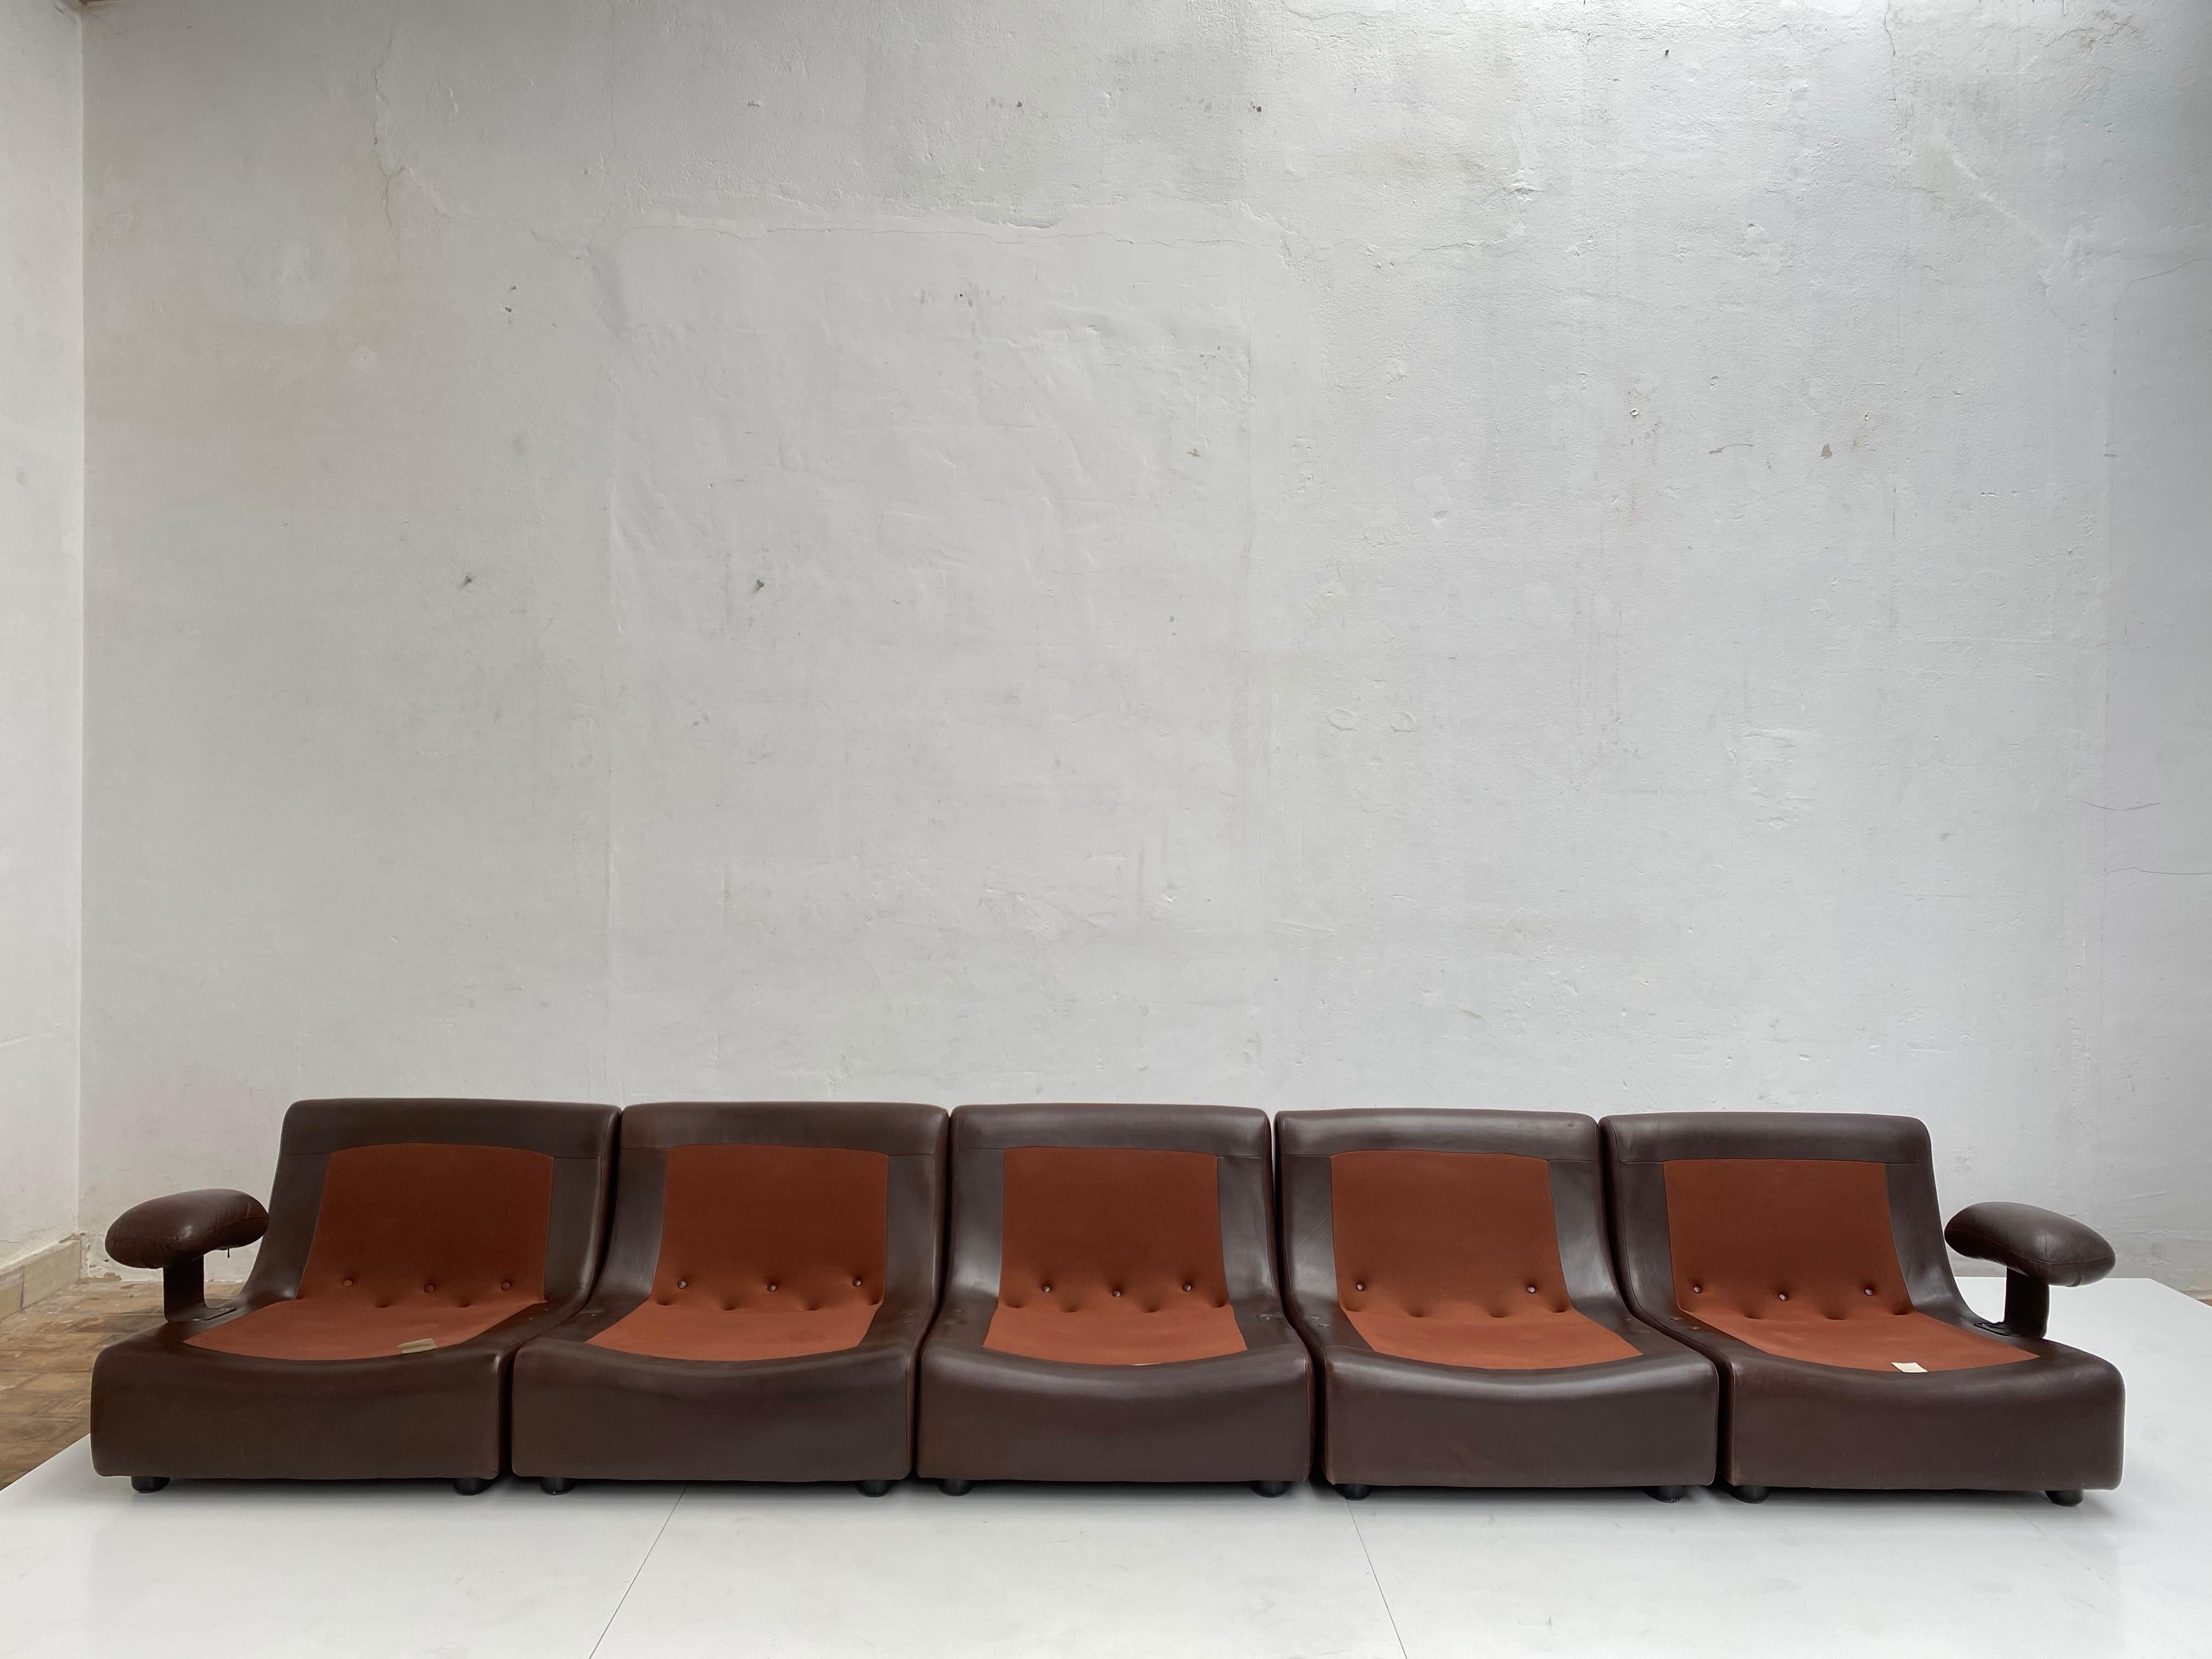 Chocolate Brown Leather 5-Piece Modular Seating System, COR Germany, 1970s 9